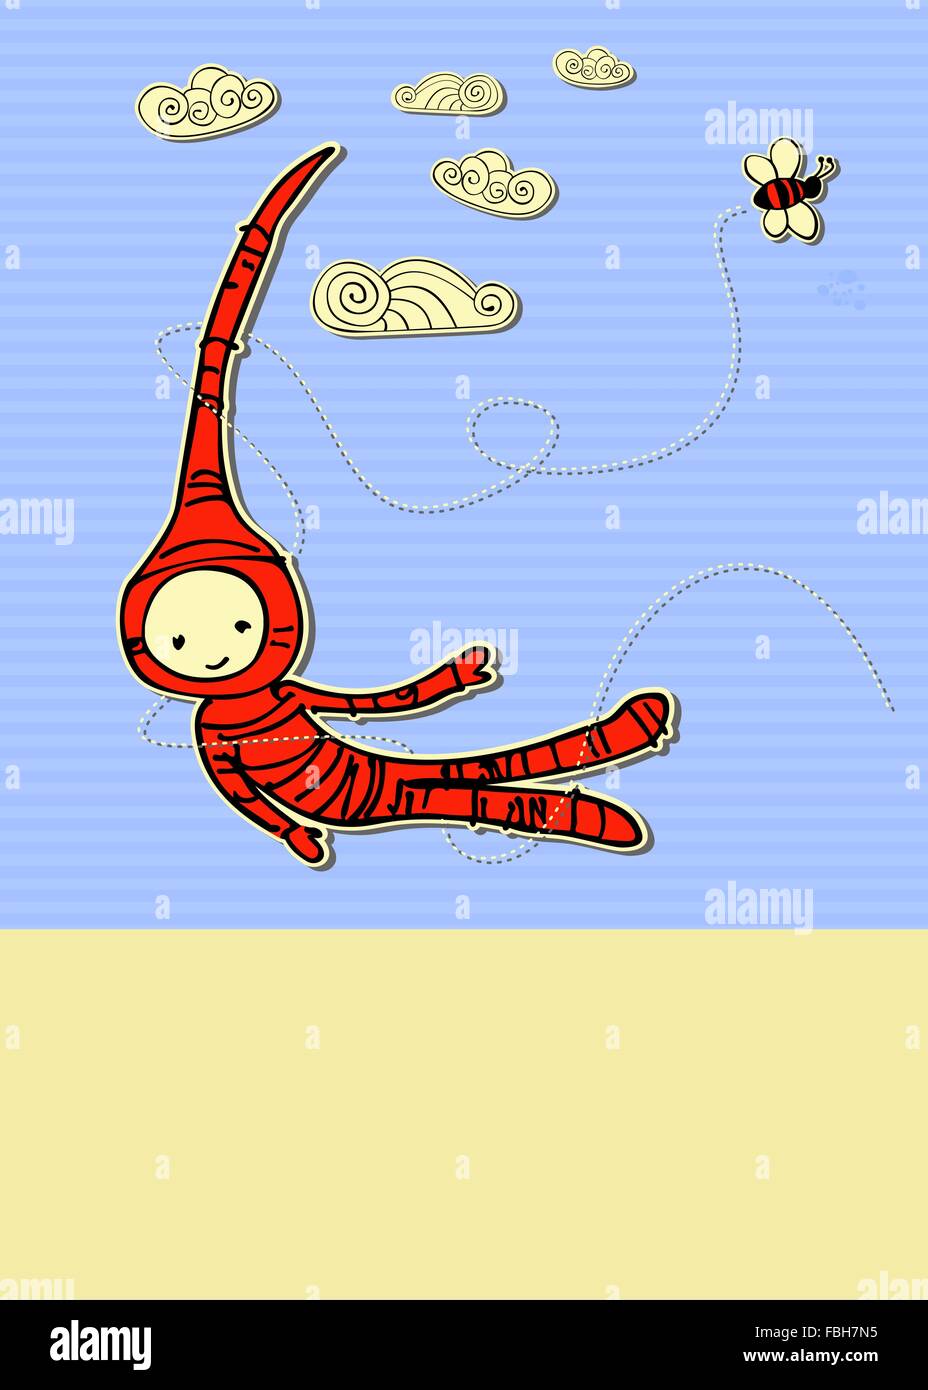 Cute birthday card for kids with a flying creature. Stock Vector